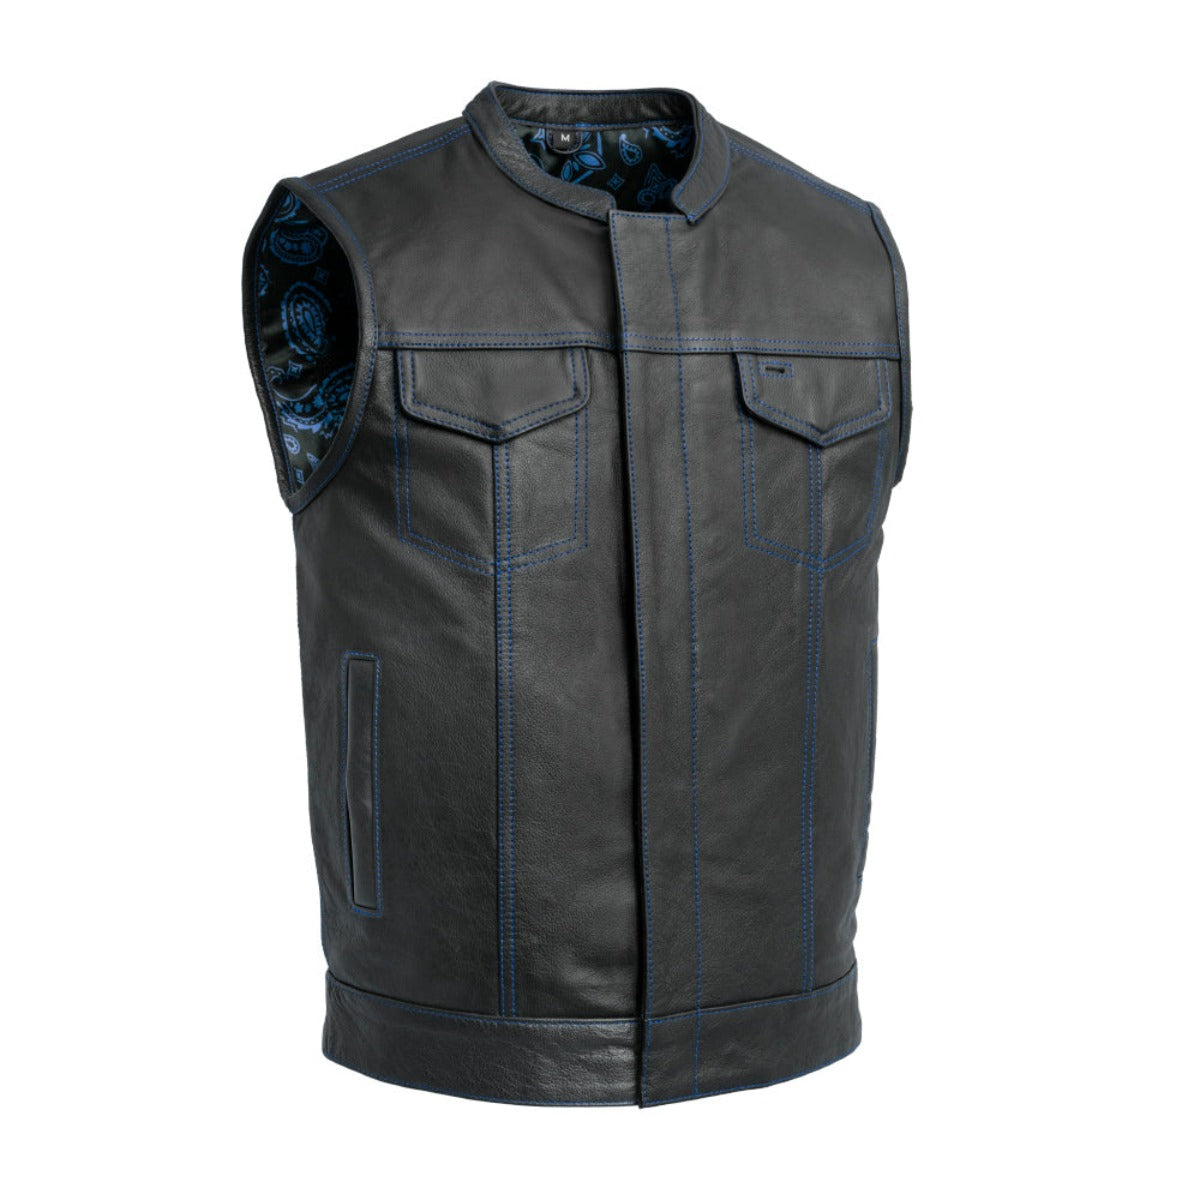 First Manufacturing Men's The Cut Motorcycle Leather Vest, Black/Blue